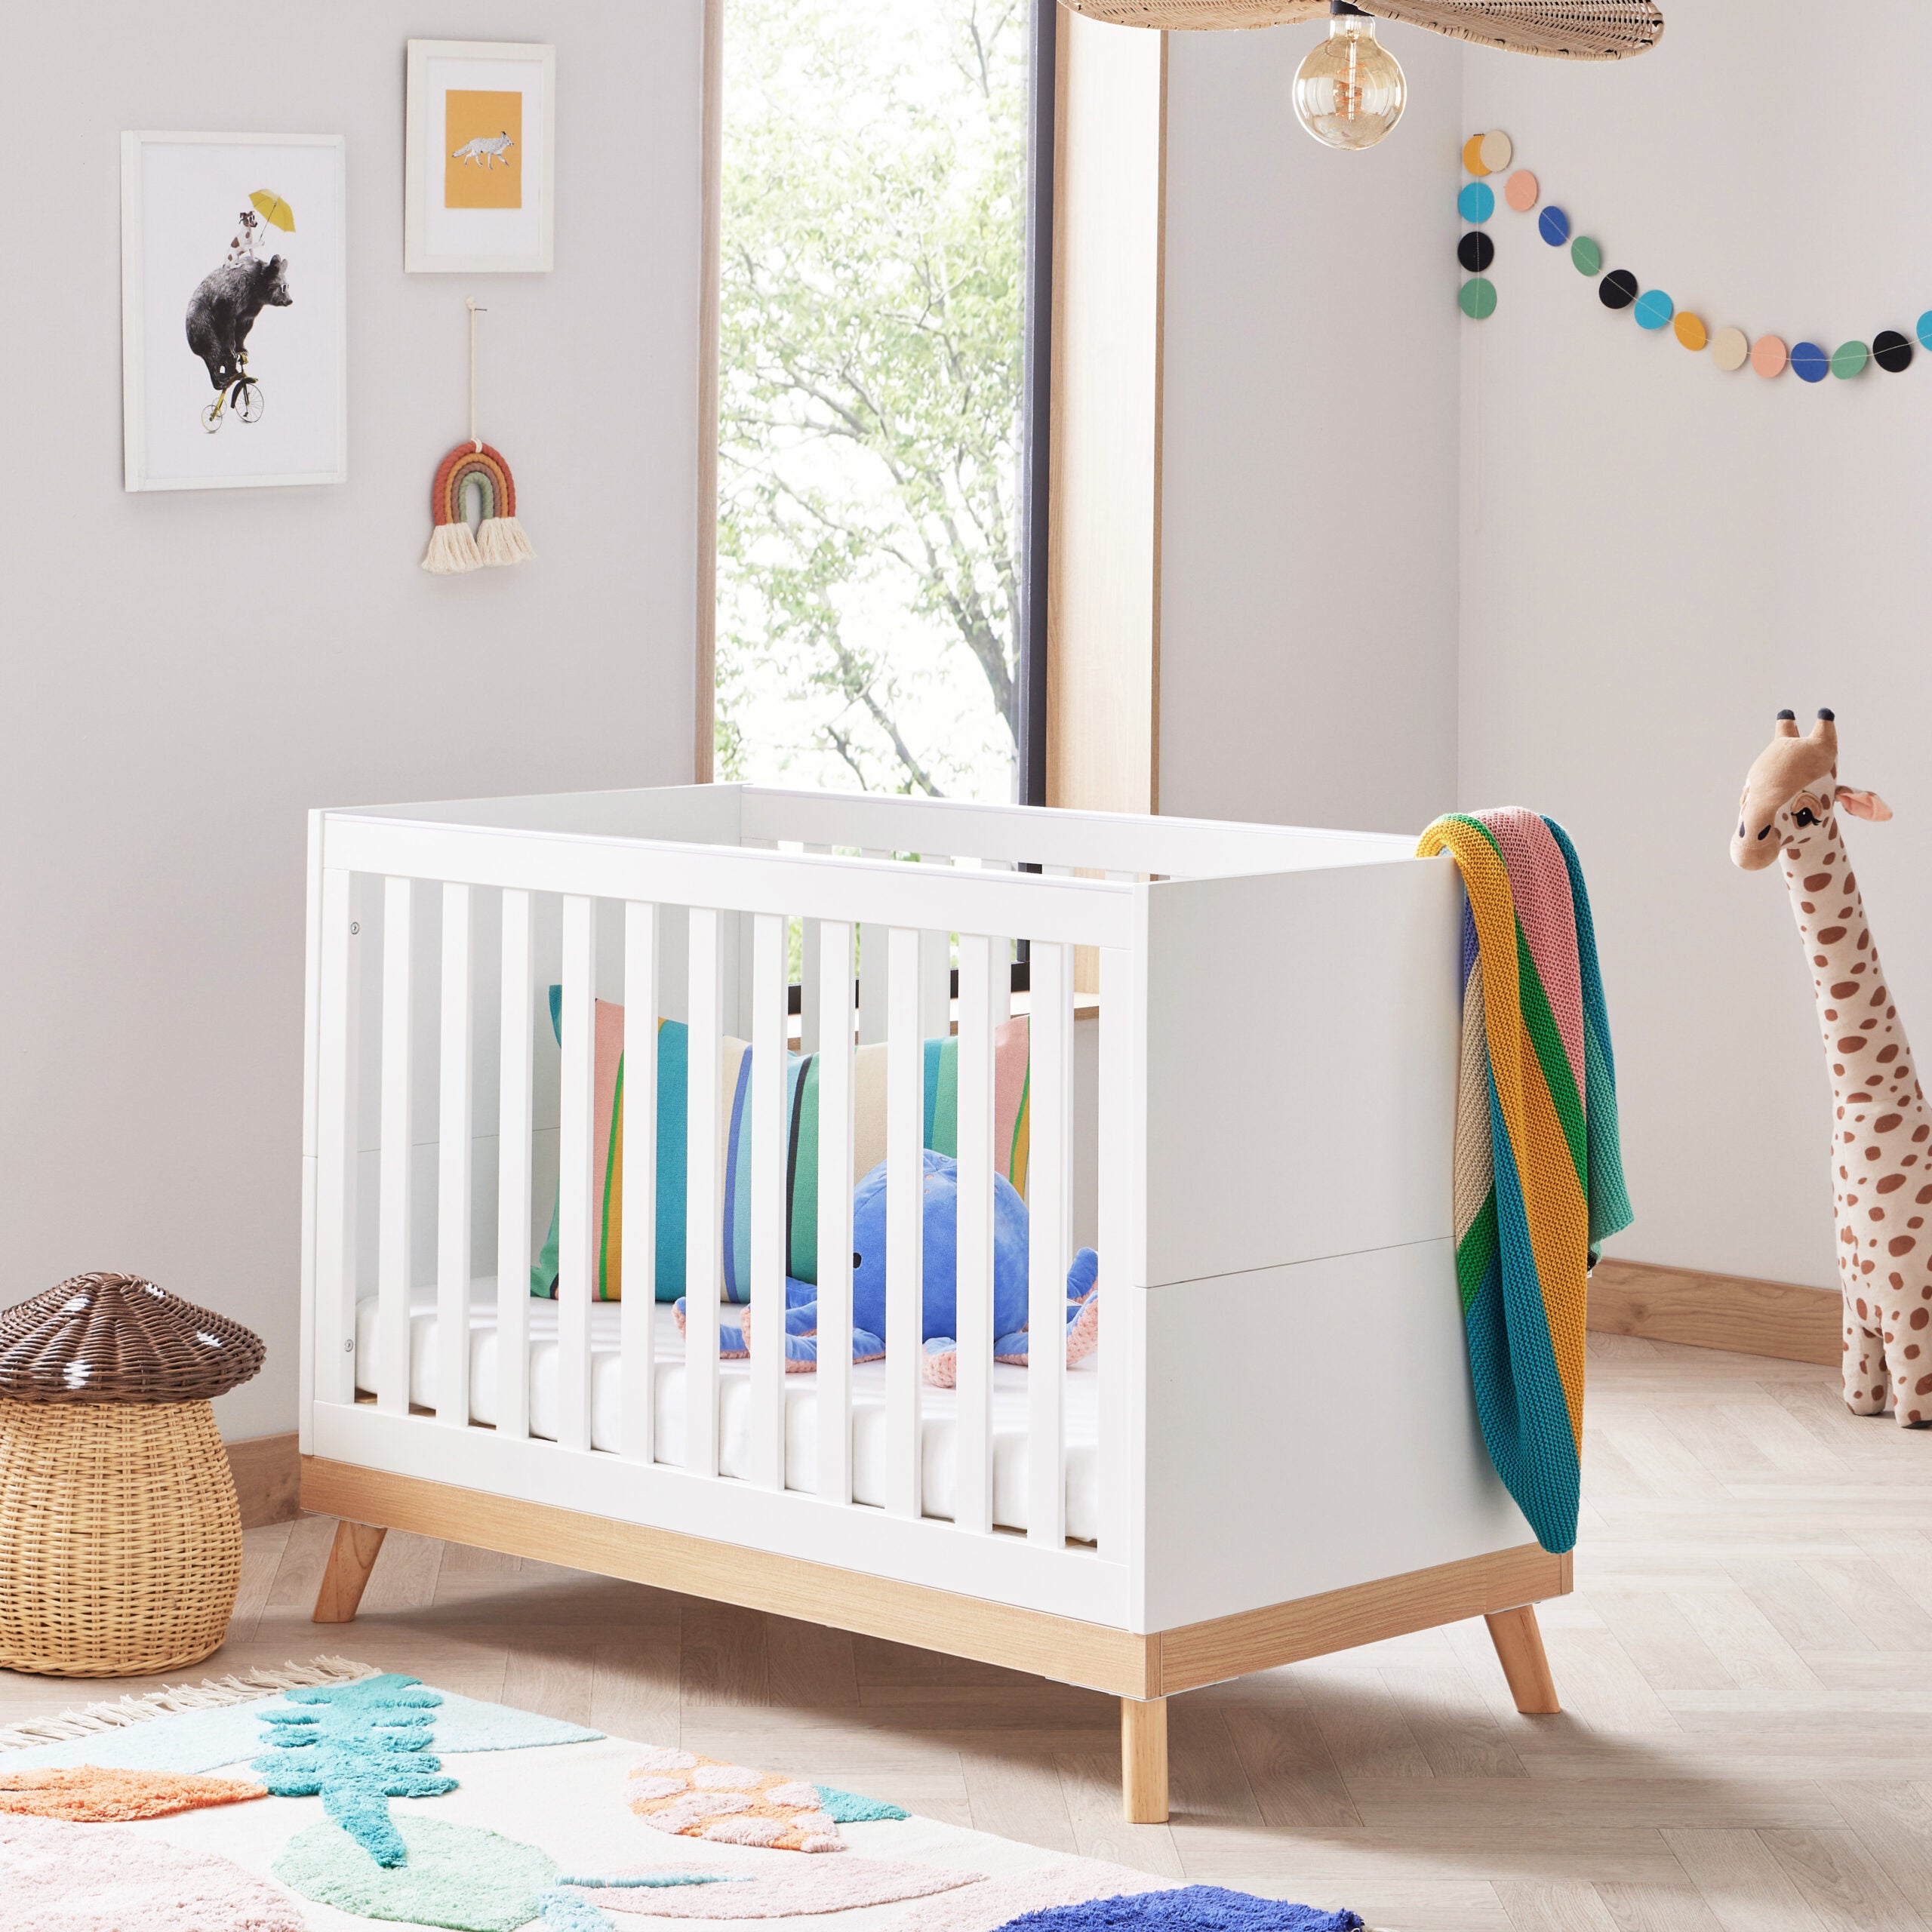 View Babymore Mona Mini Cot Bed White information